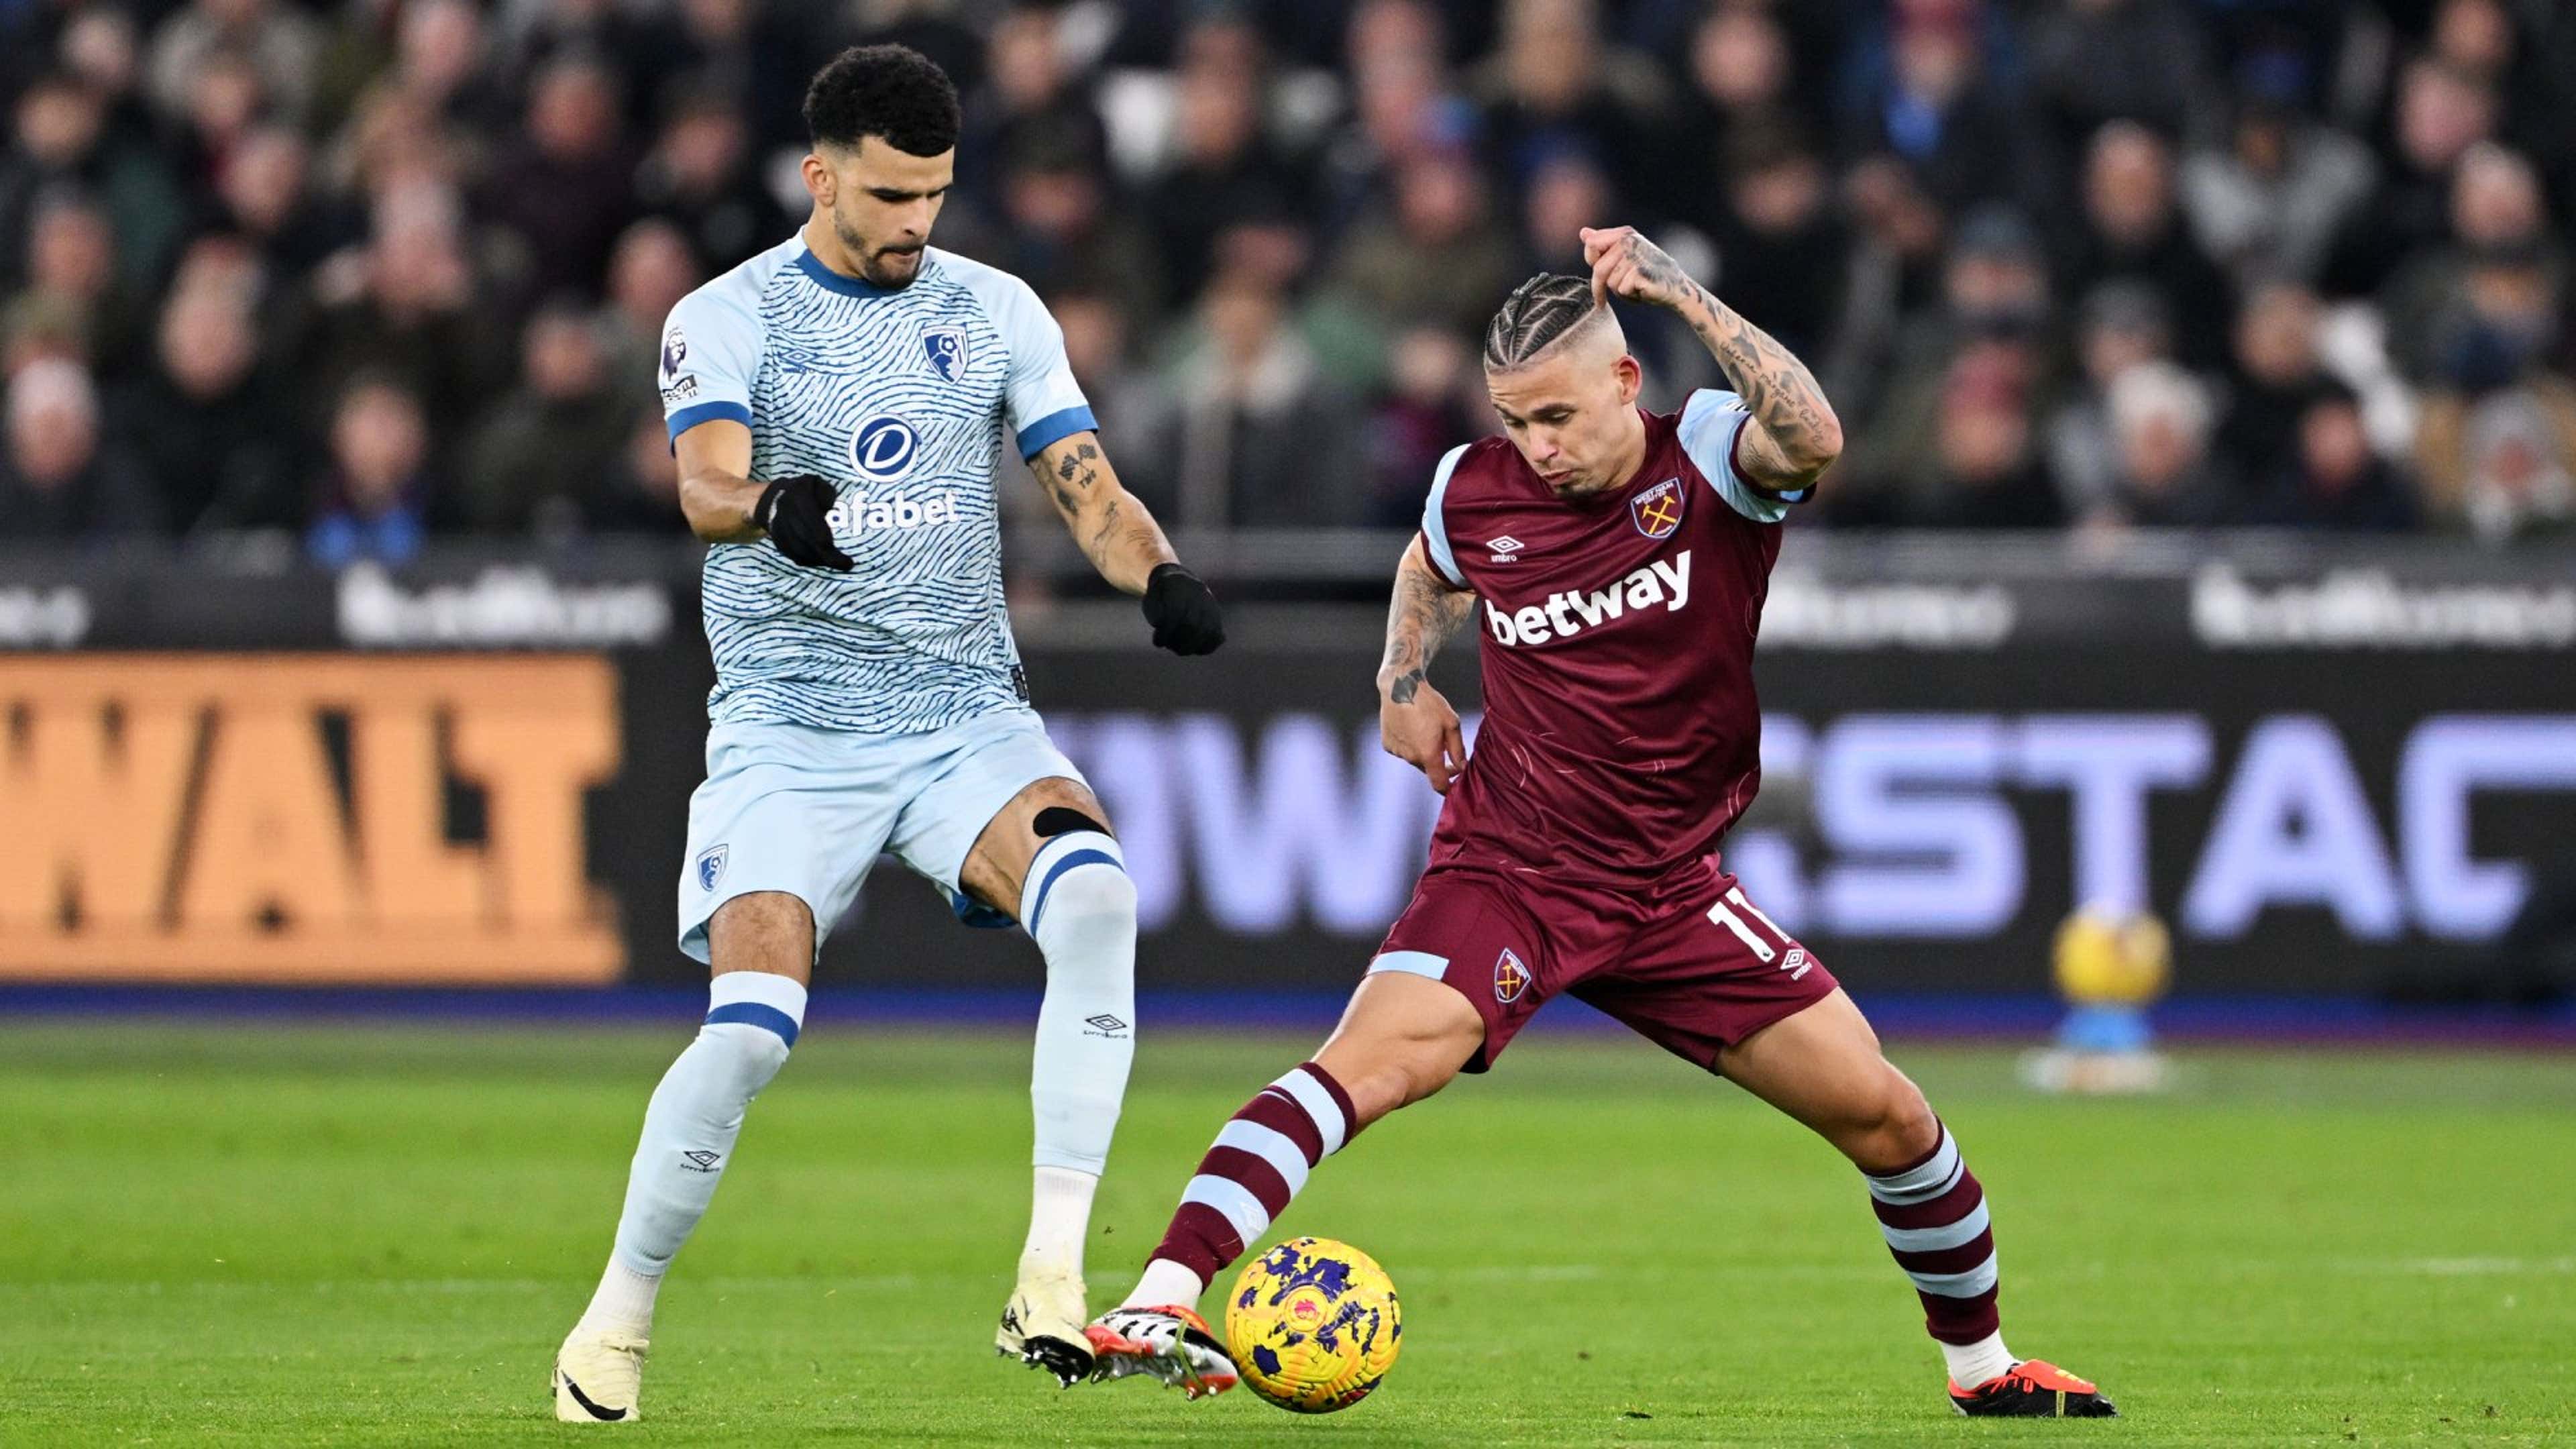 VIDEO: Nightmare for Kalvin Phillips! West Ham new boy gifts Dominic Solanke goal after just two minutes on horror debut for Hammers | Goal.com Singapore